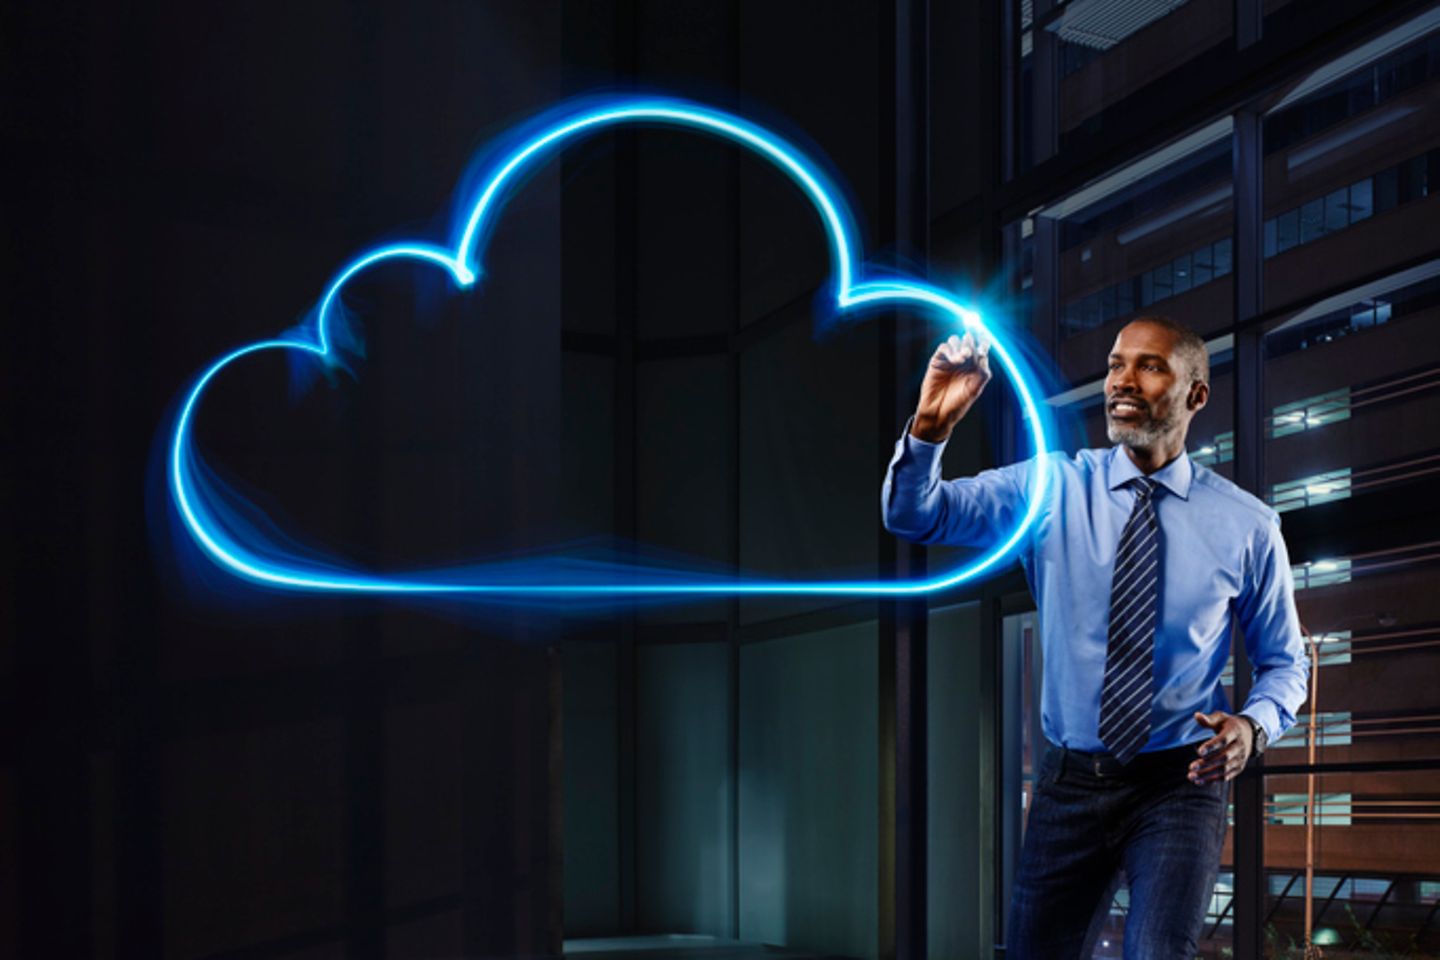 A man in a suit paints a virtual representation of the cloud with light.